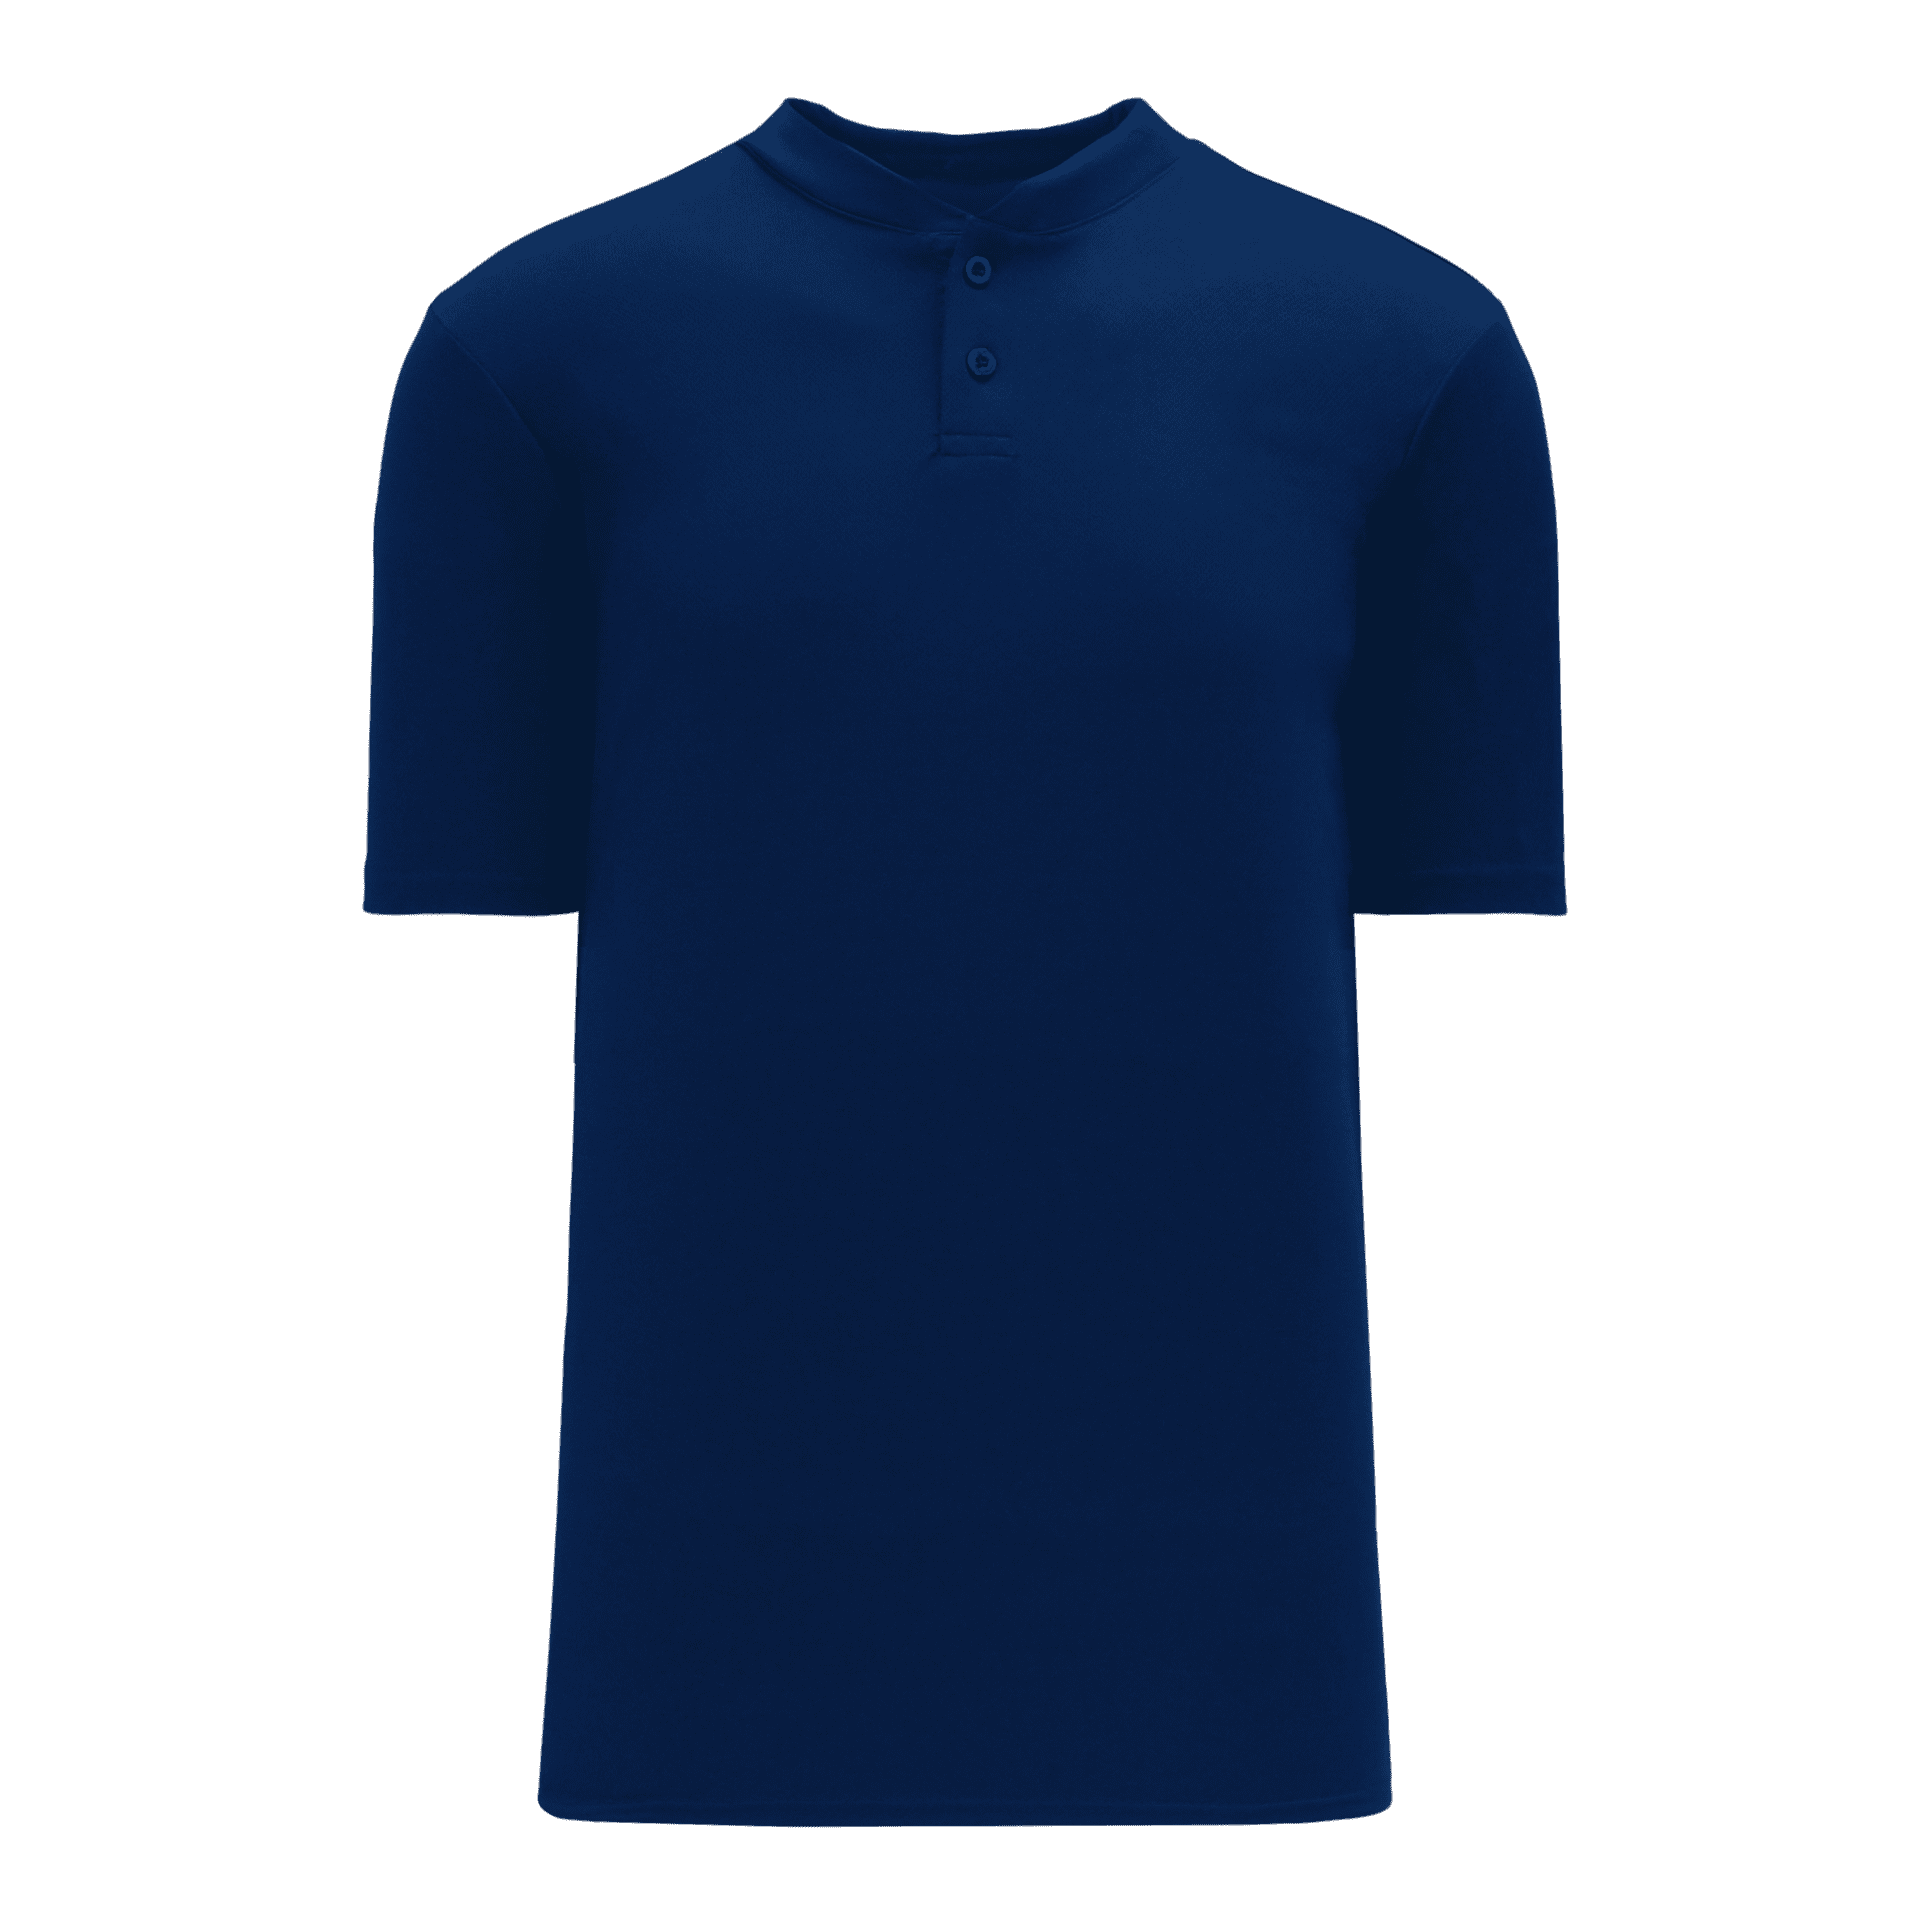 ATHLETIC KNIT TWO BUTTON BASEBALL JERSEY #BA1347 Navy